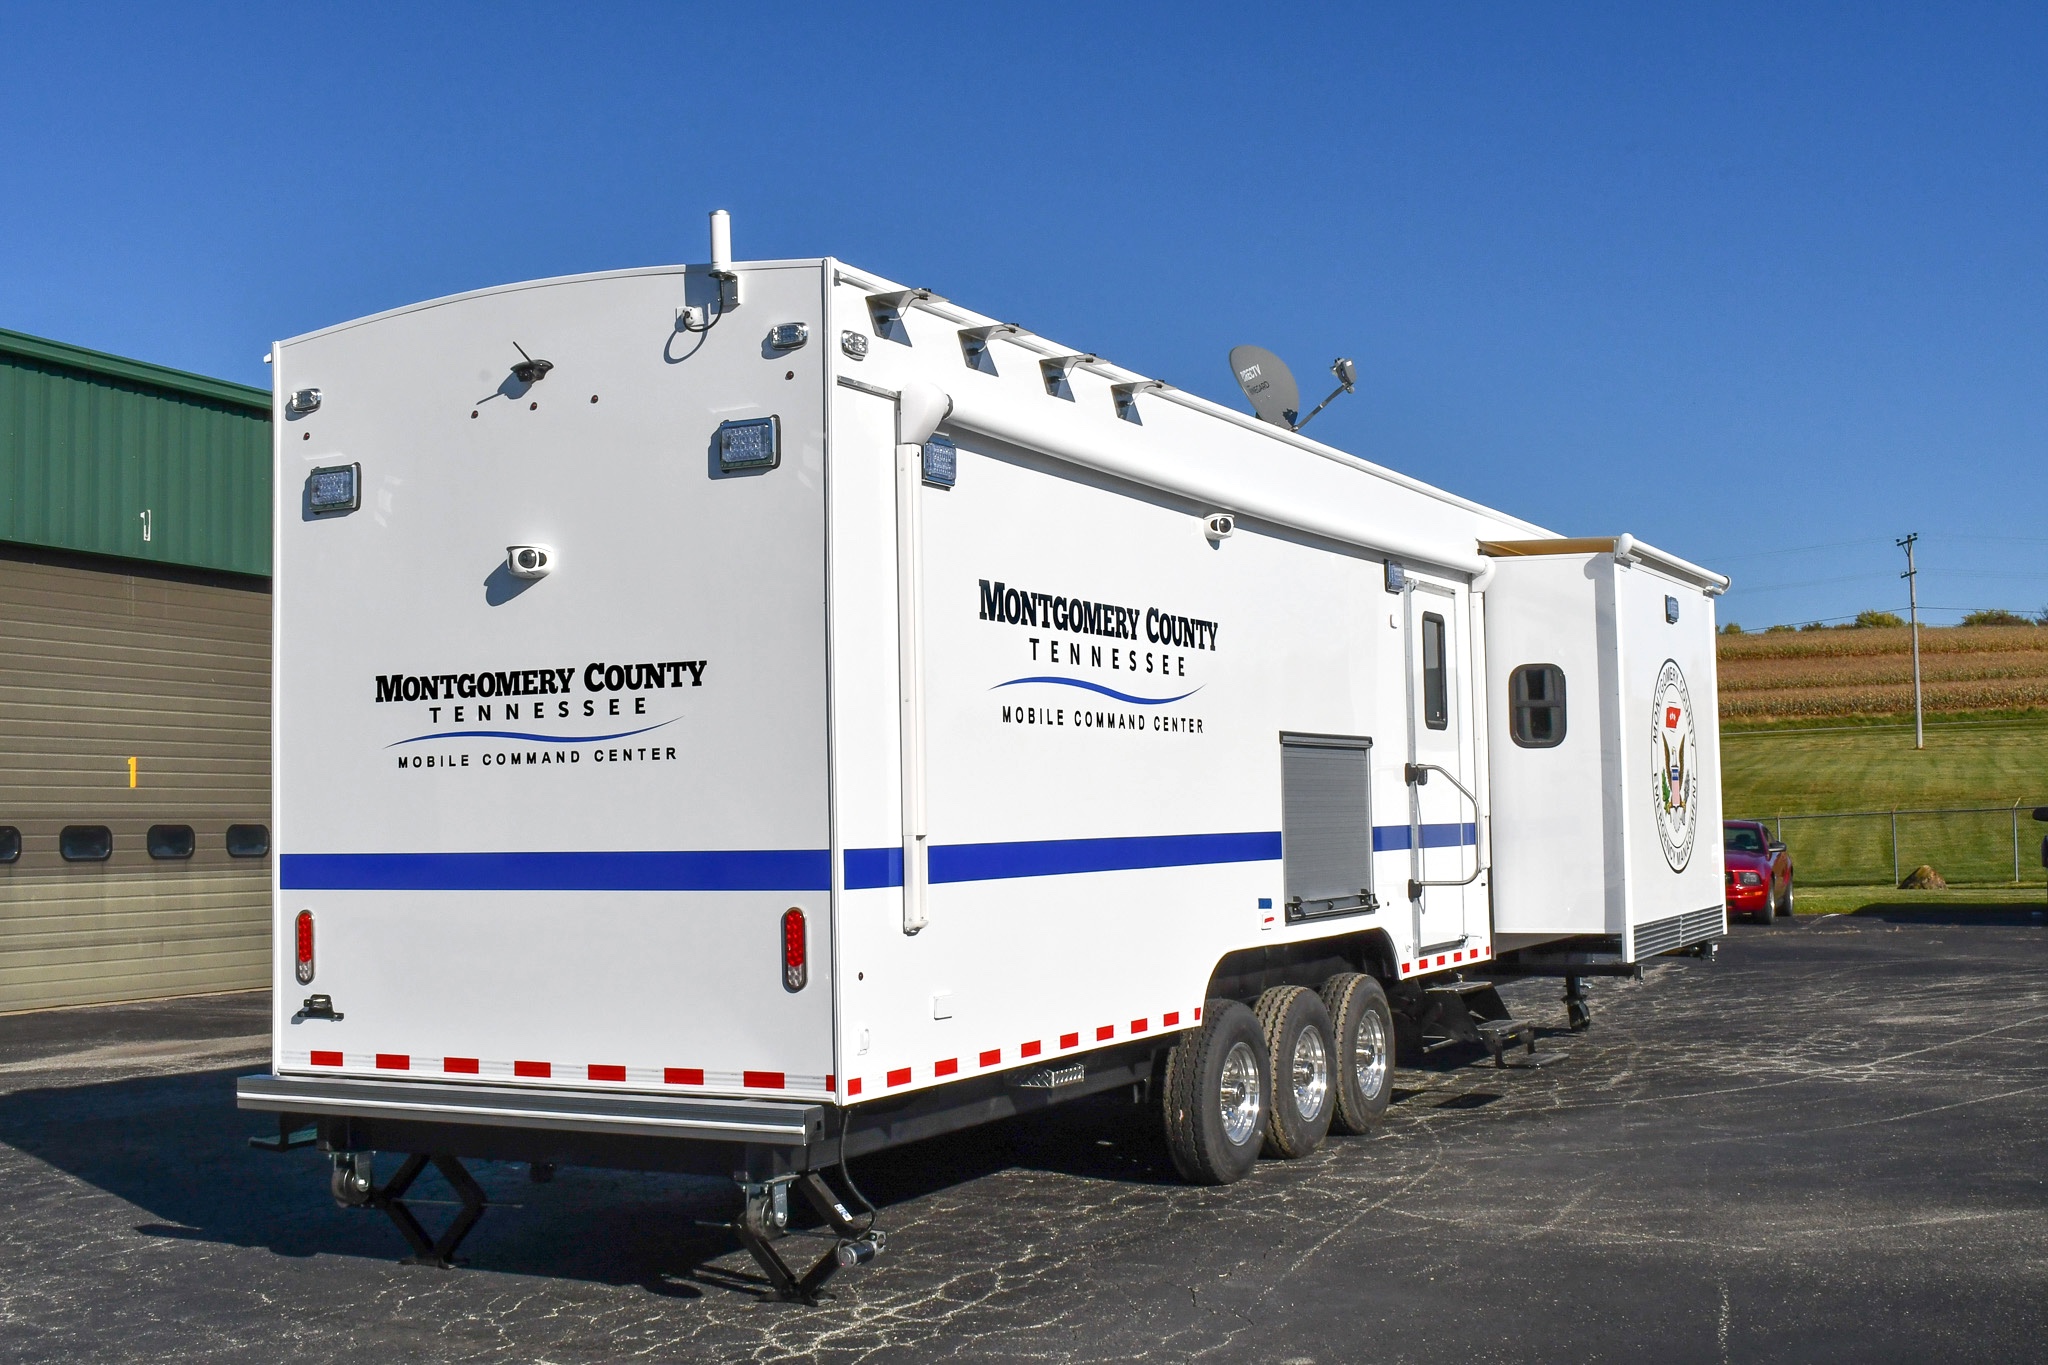 An exterior view of the unit for Montgomery County, TN.